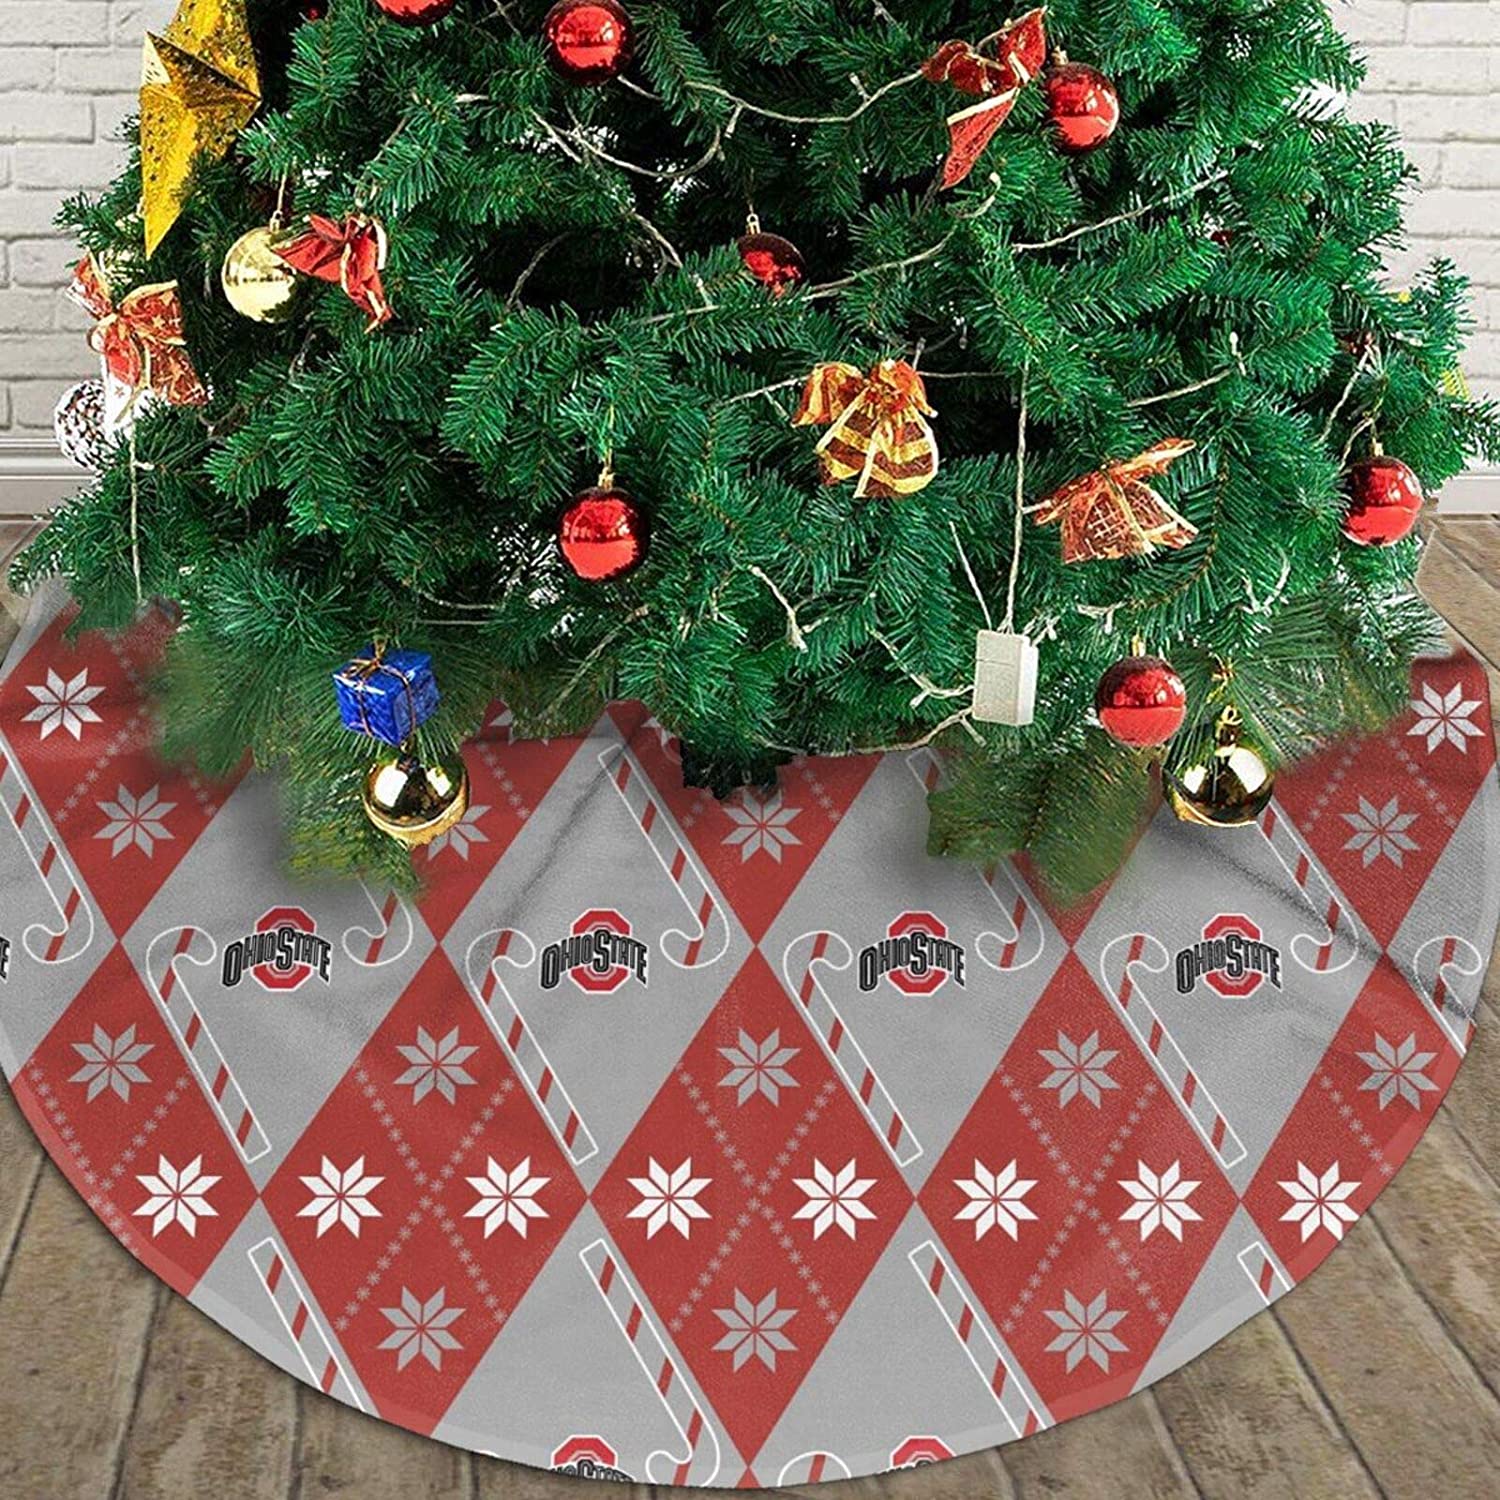 TWOIYIN Oh-io Christmas Tree Skirt 48Inches St-ate Buck-Eyes Rustic Xmas Tree Skirt for Christmas Decorations Indoor